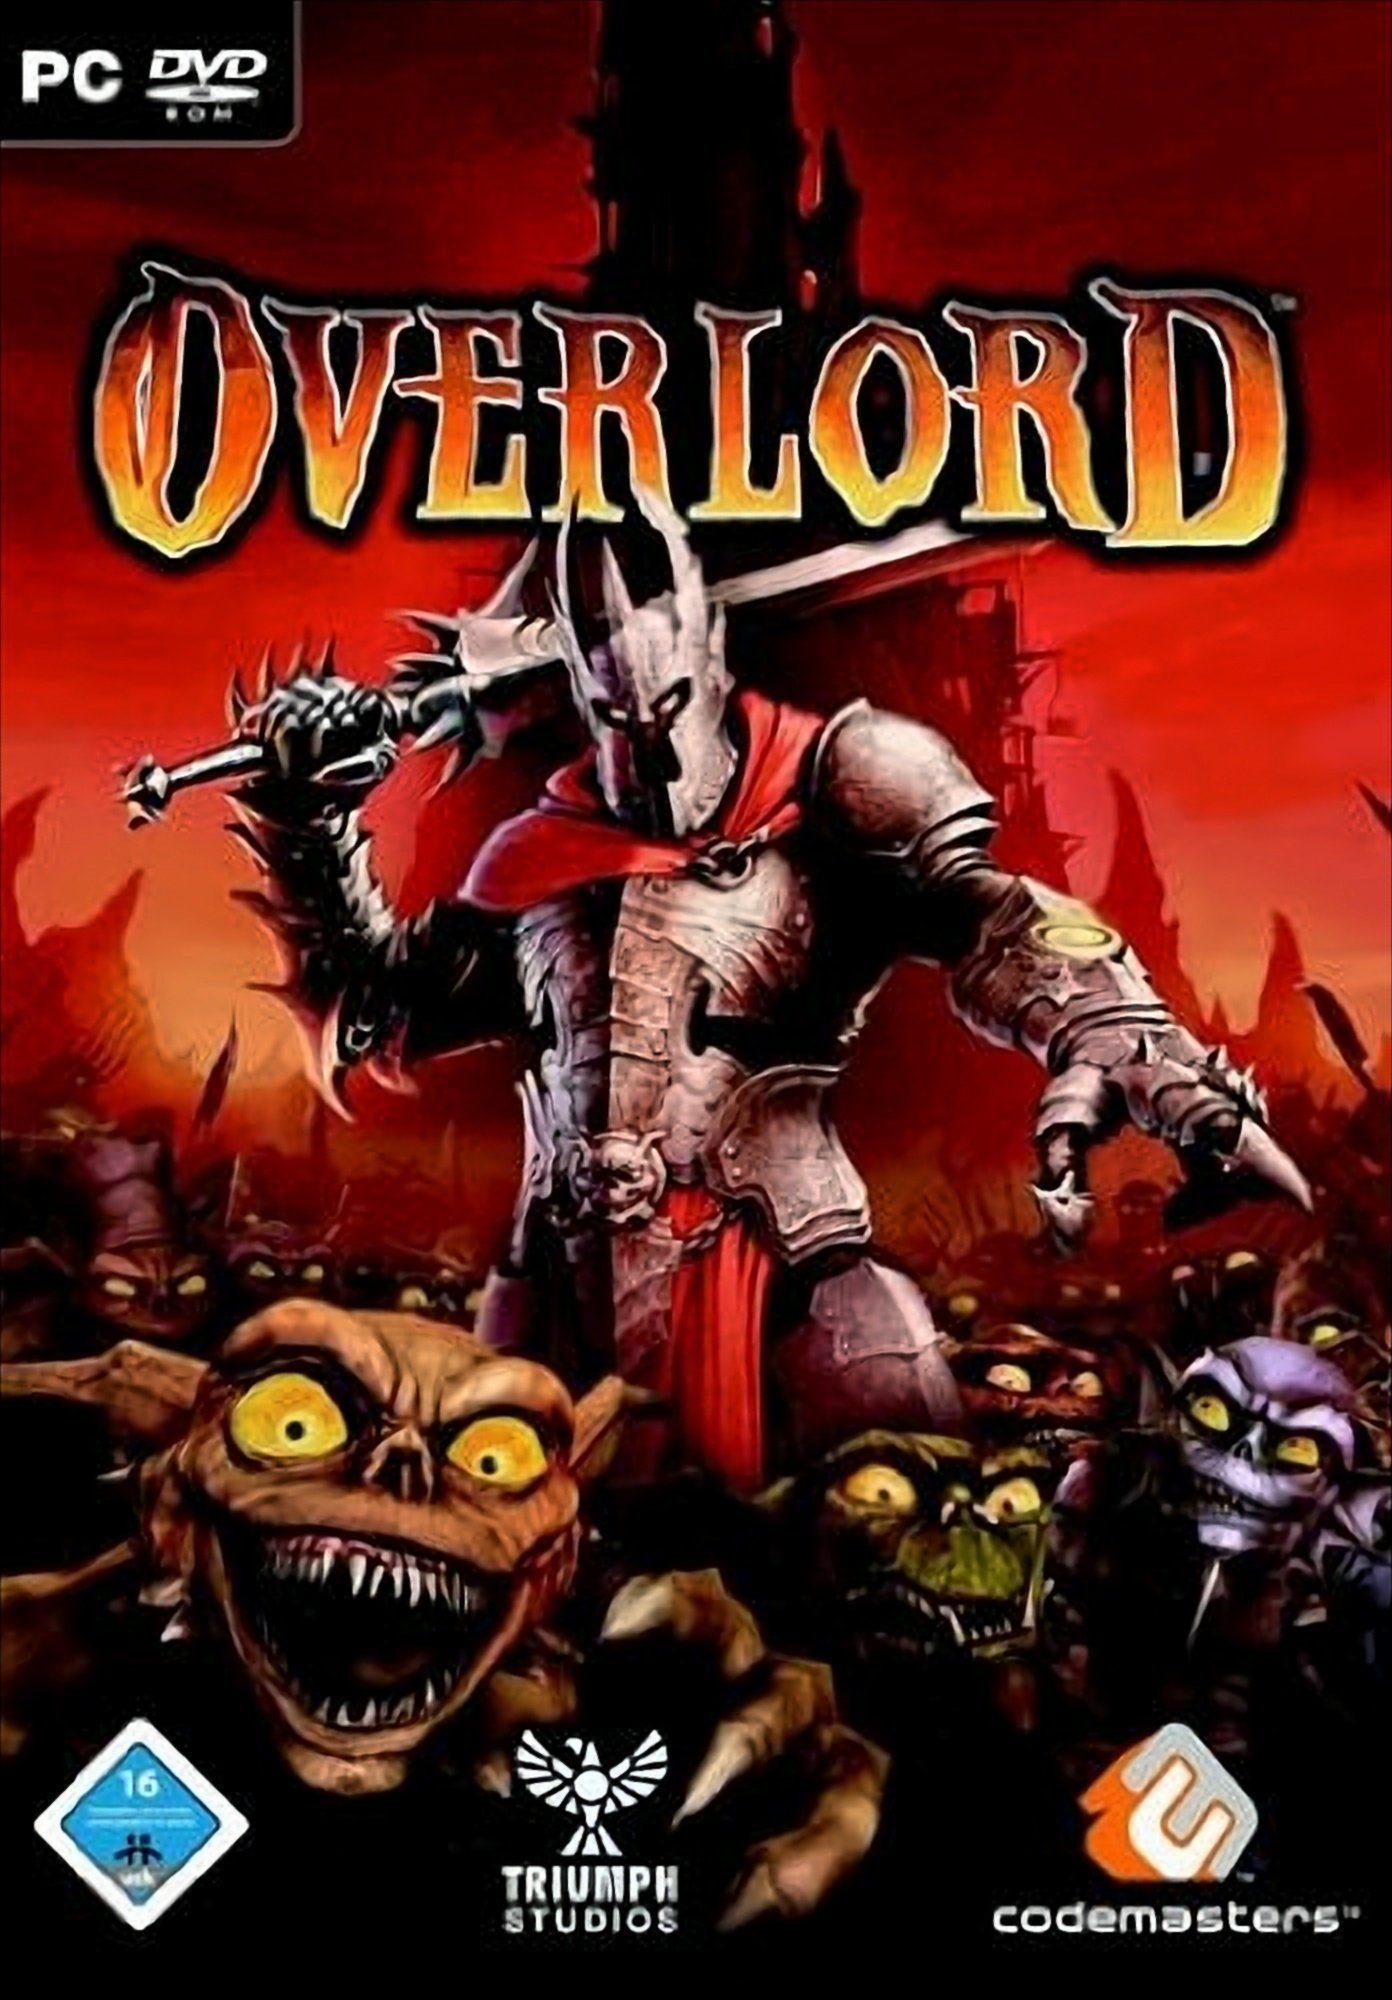 Overlord PC